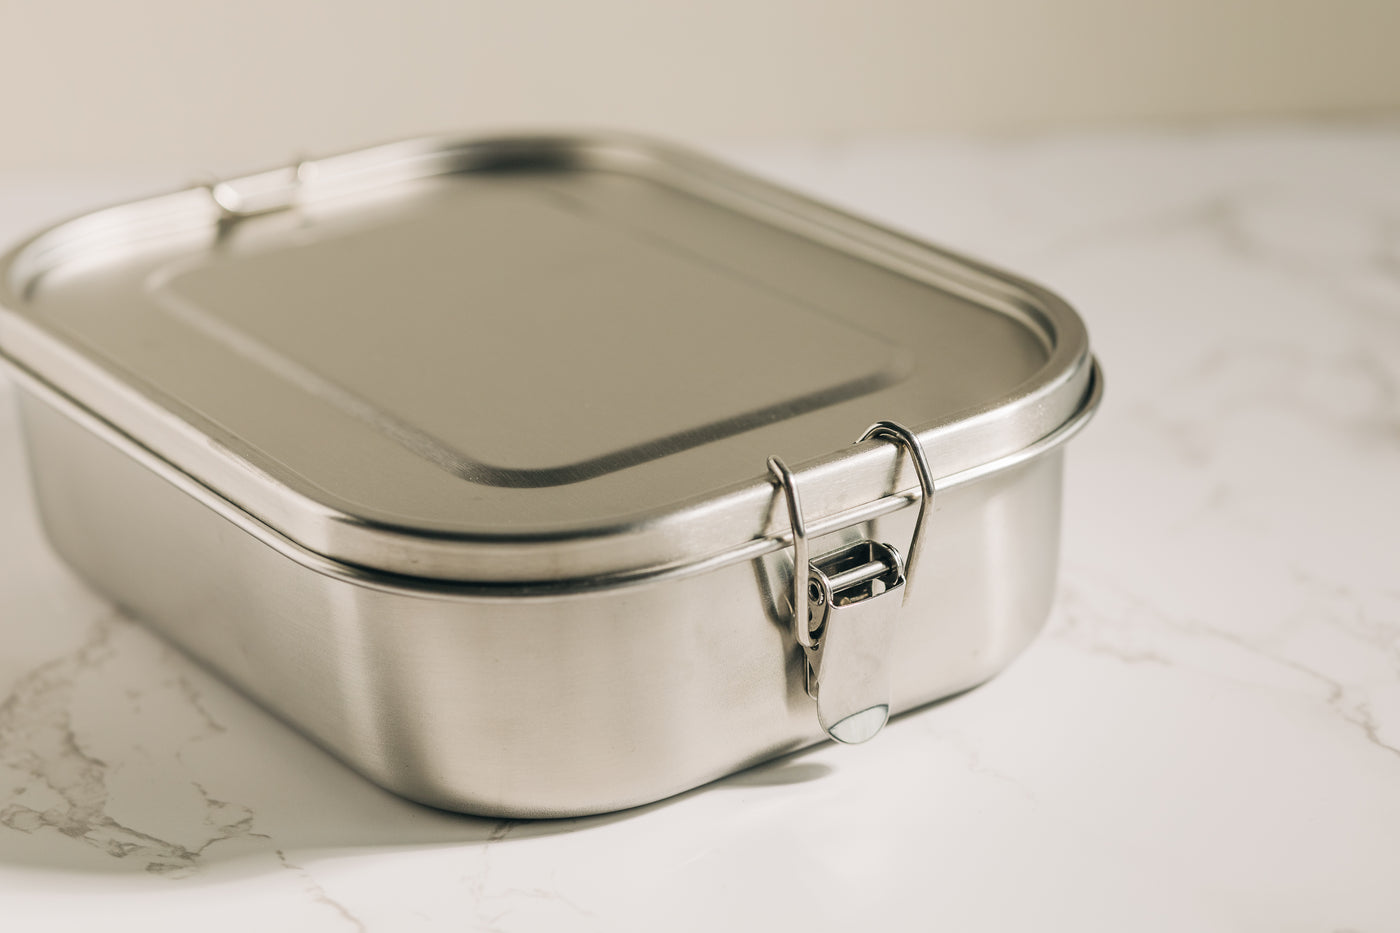 Stainless Steel Bento Style Lunchbox - 3 Compartments